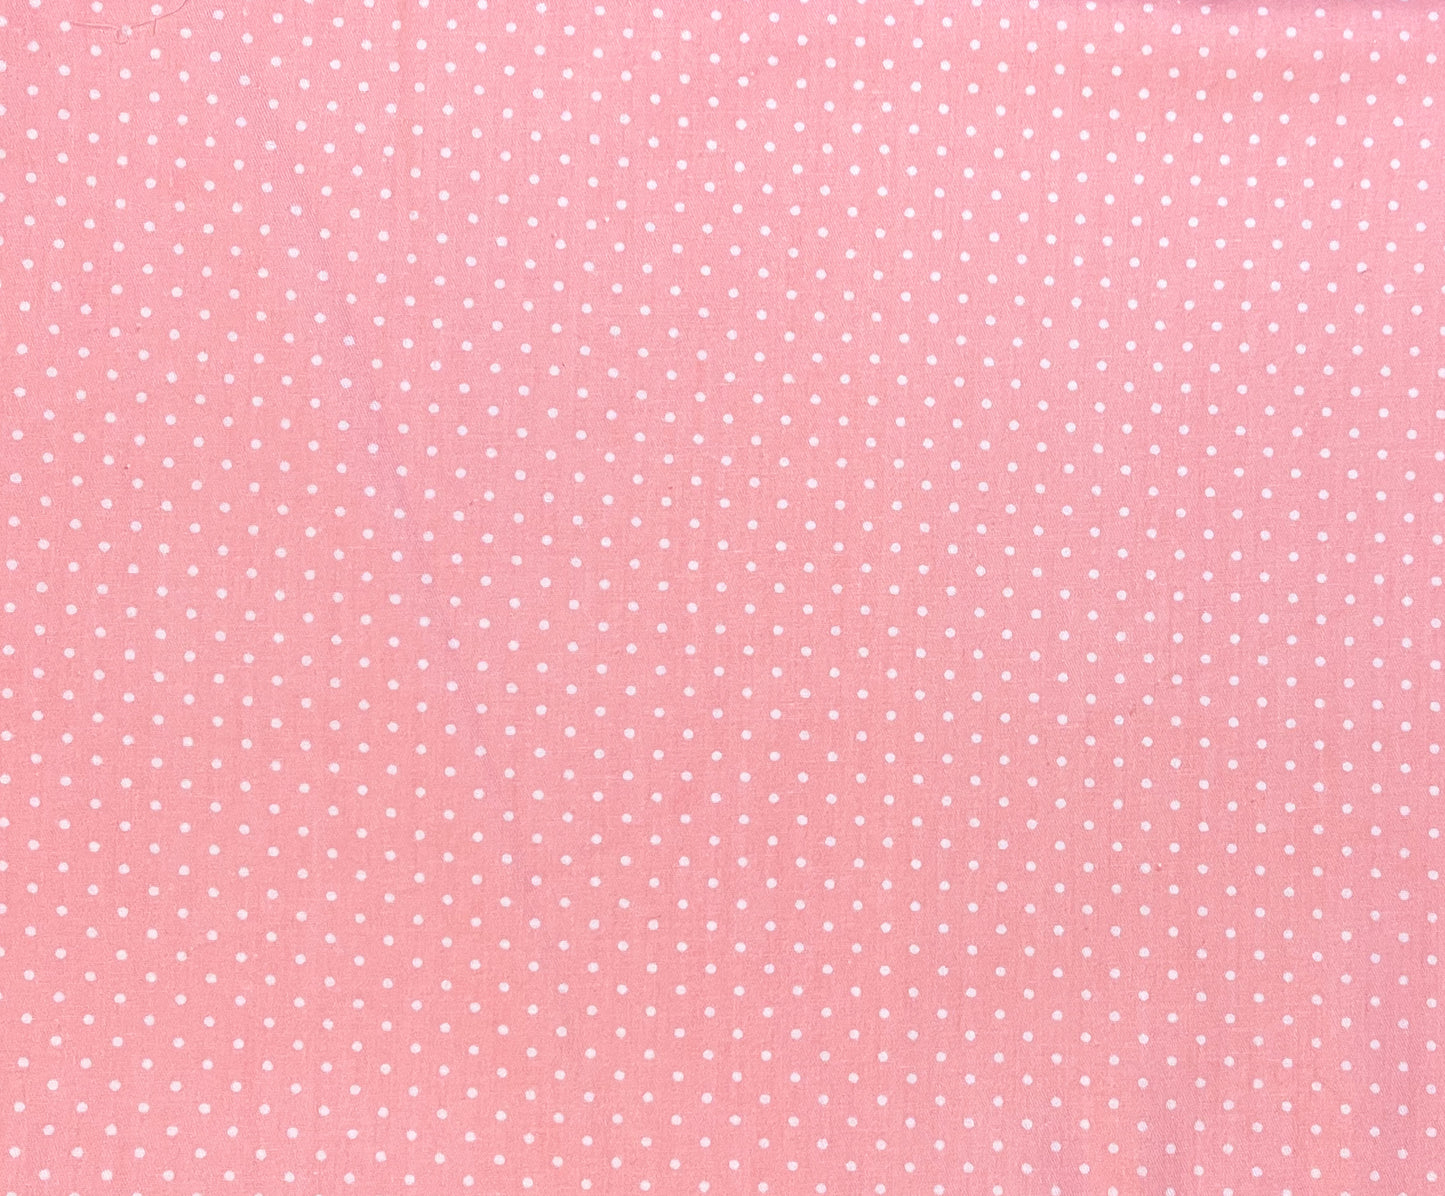 White dots on pale pink